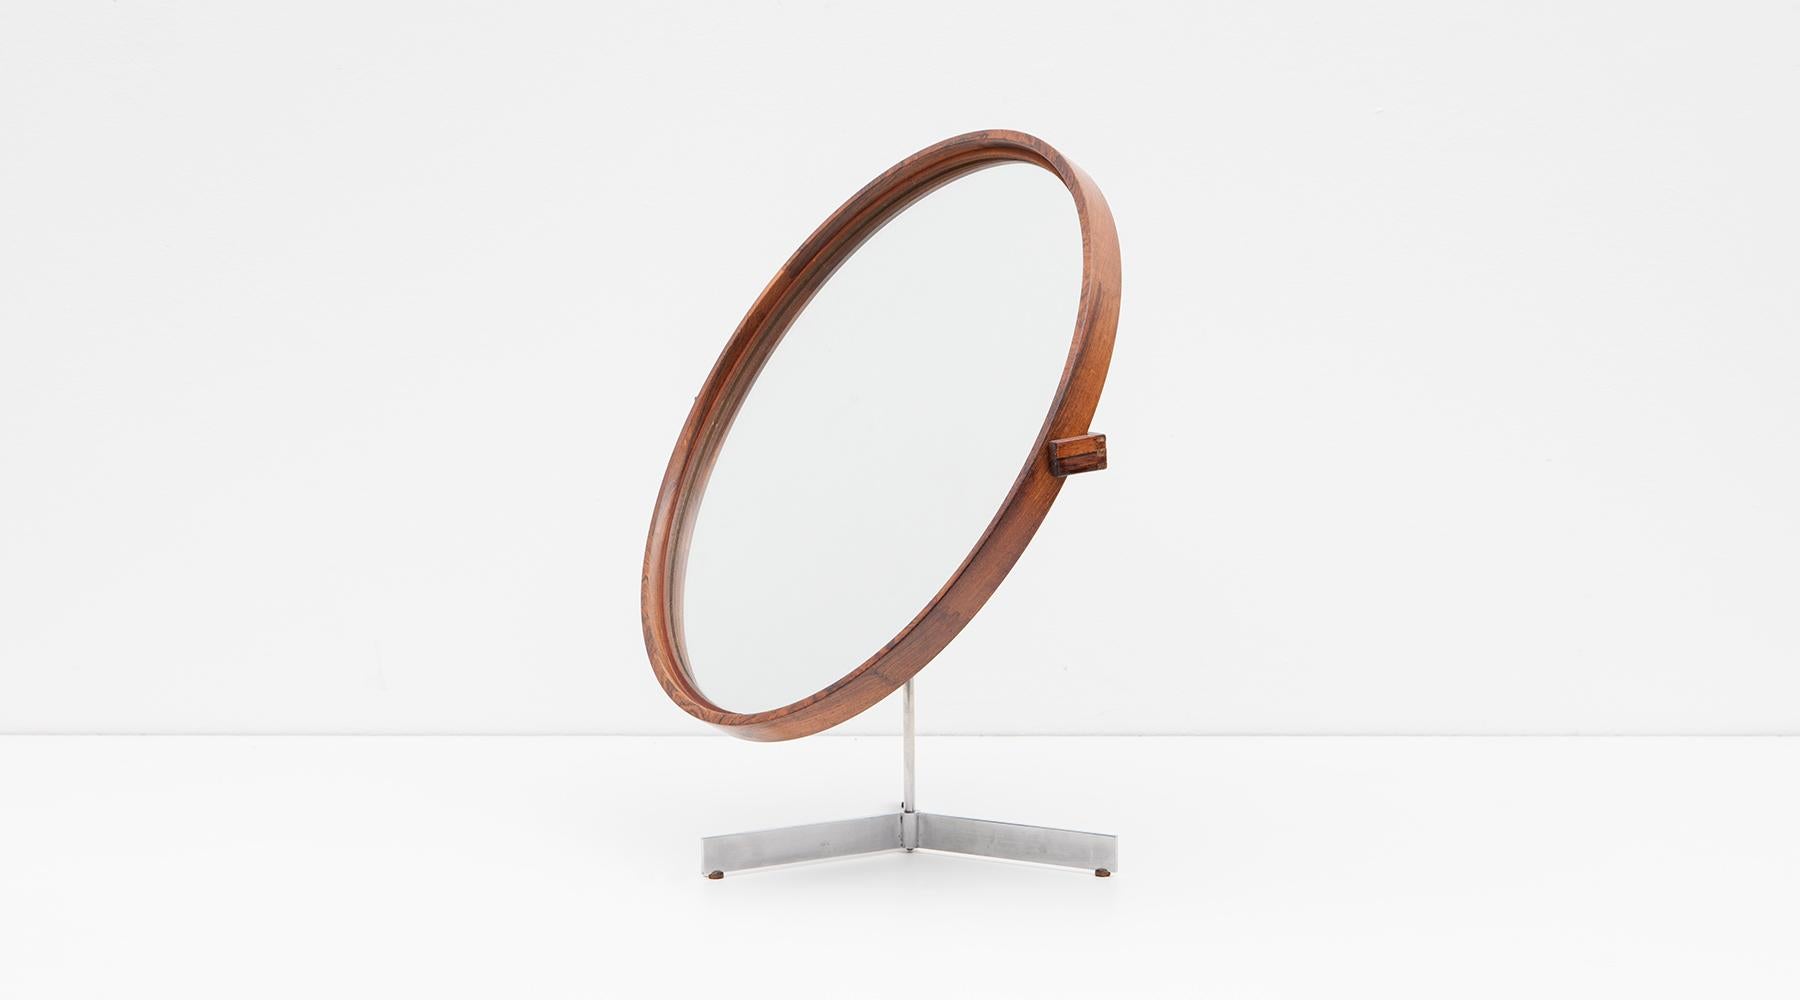 Mirror in rosewood by Uno and Östen Kristiansson, Sweden, 1965.

Breathtaking round mirror framed in rosewood standing modestly on a three-legged metal frame. The mirror can be rotated and tilted backwards. Designed by famous Swedish brothers Uno